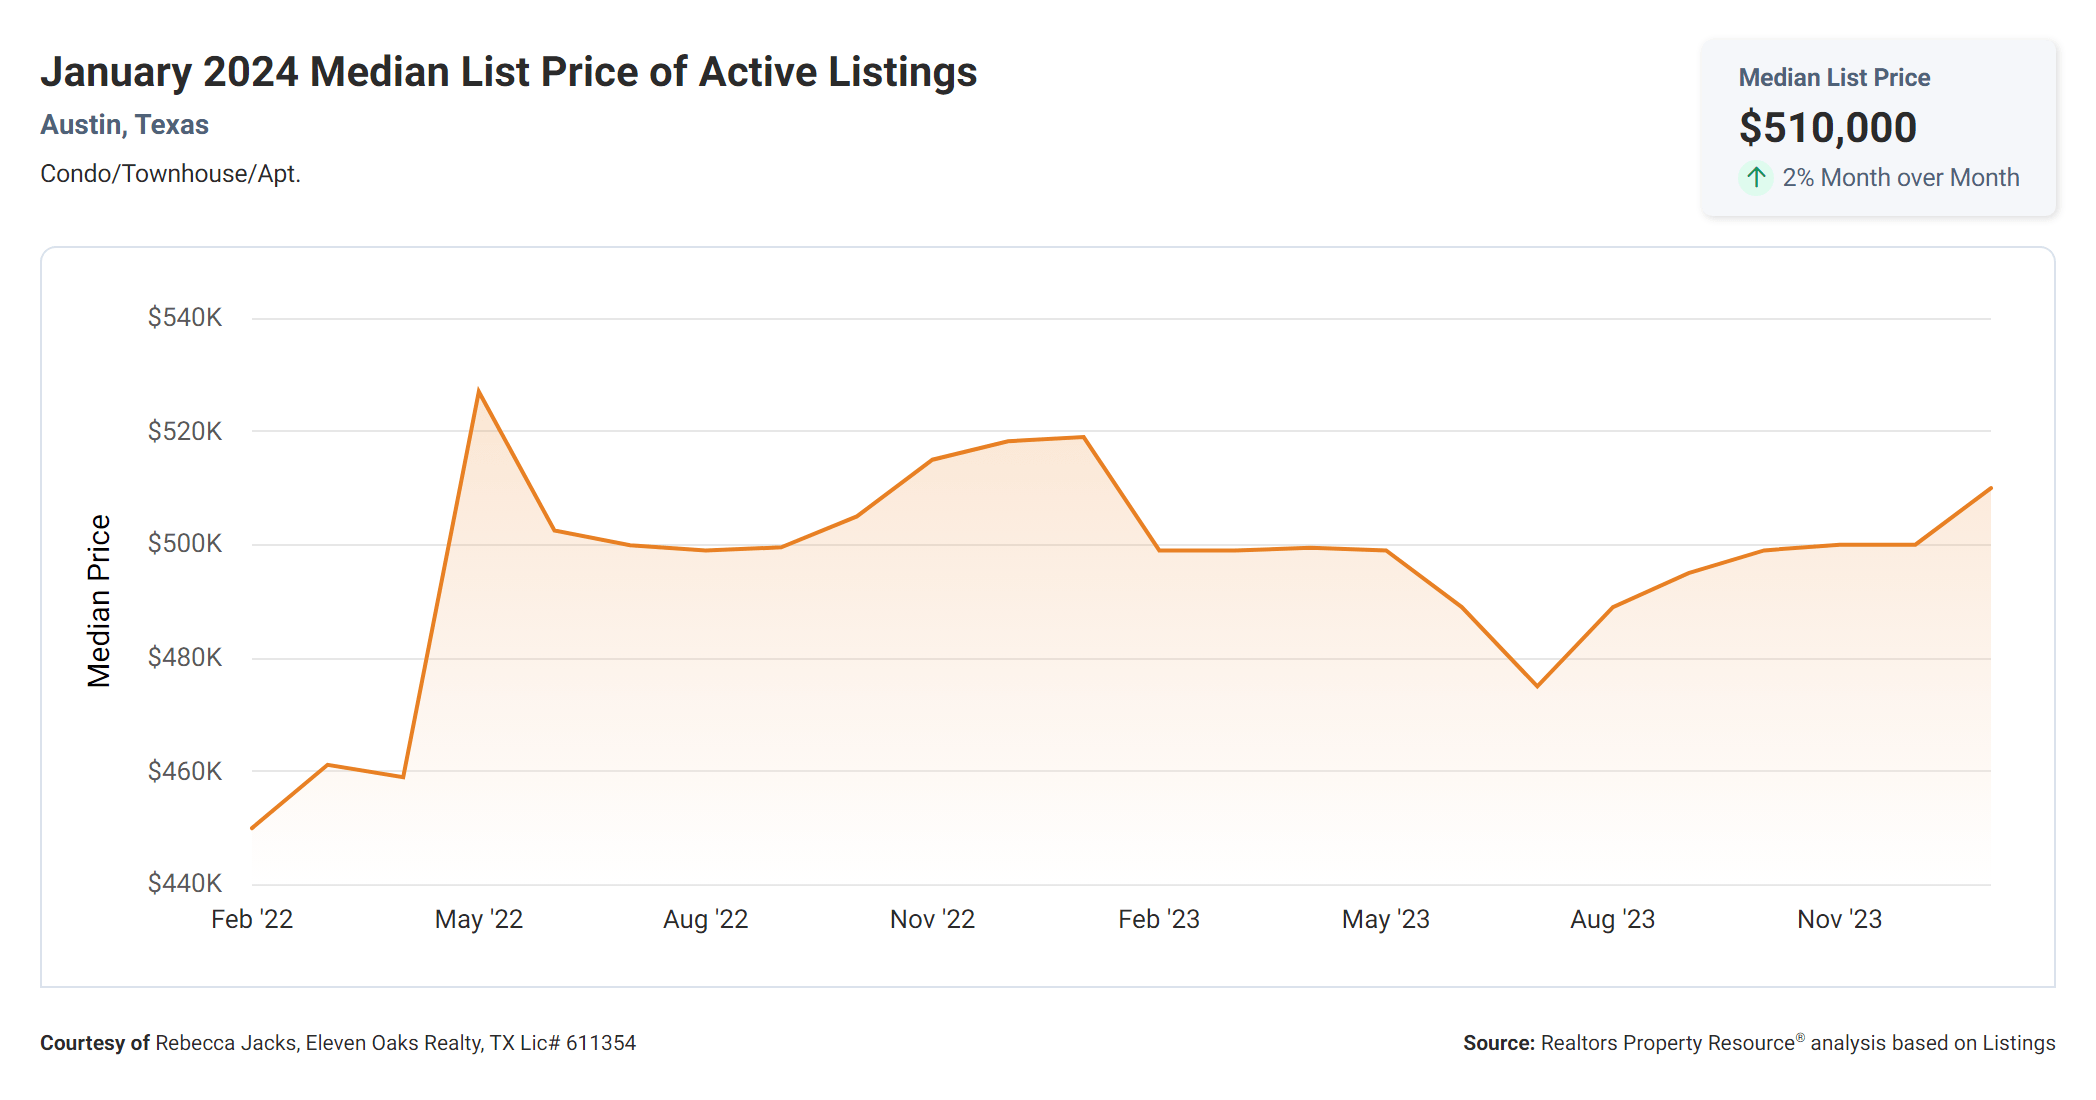 January 2024 Austin condos median list price of active listings